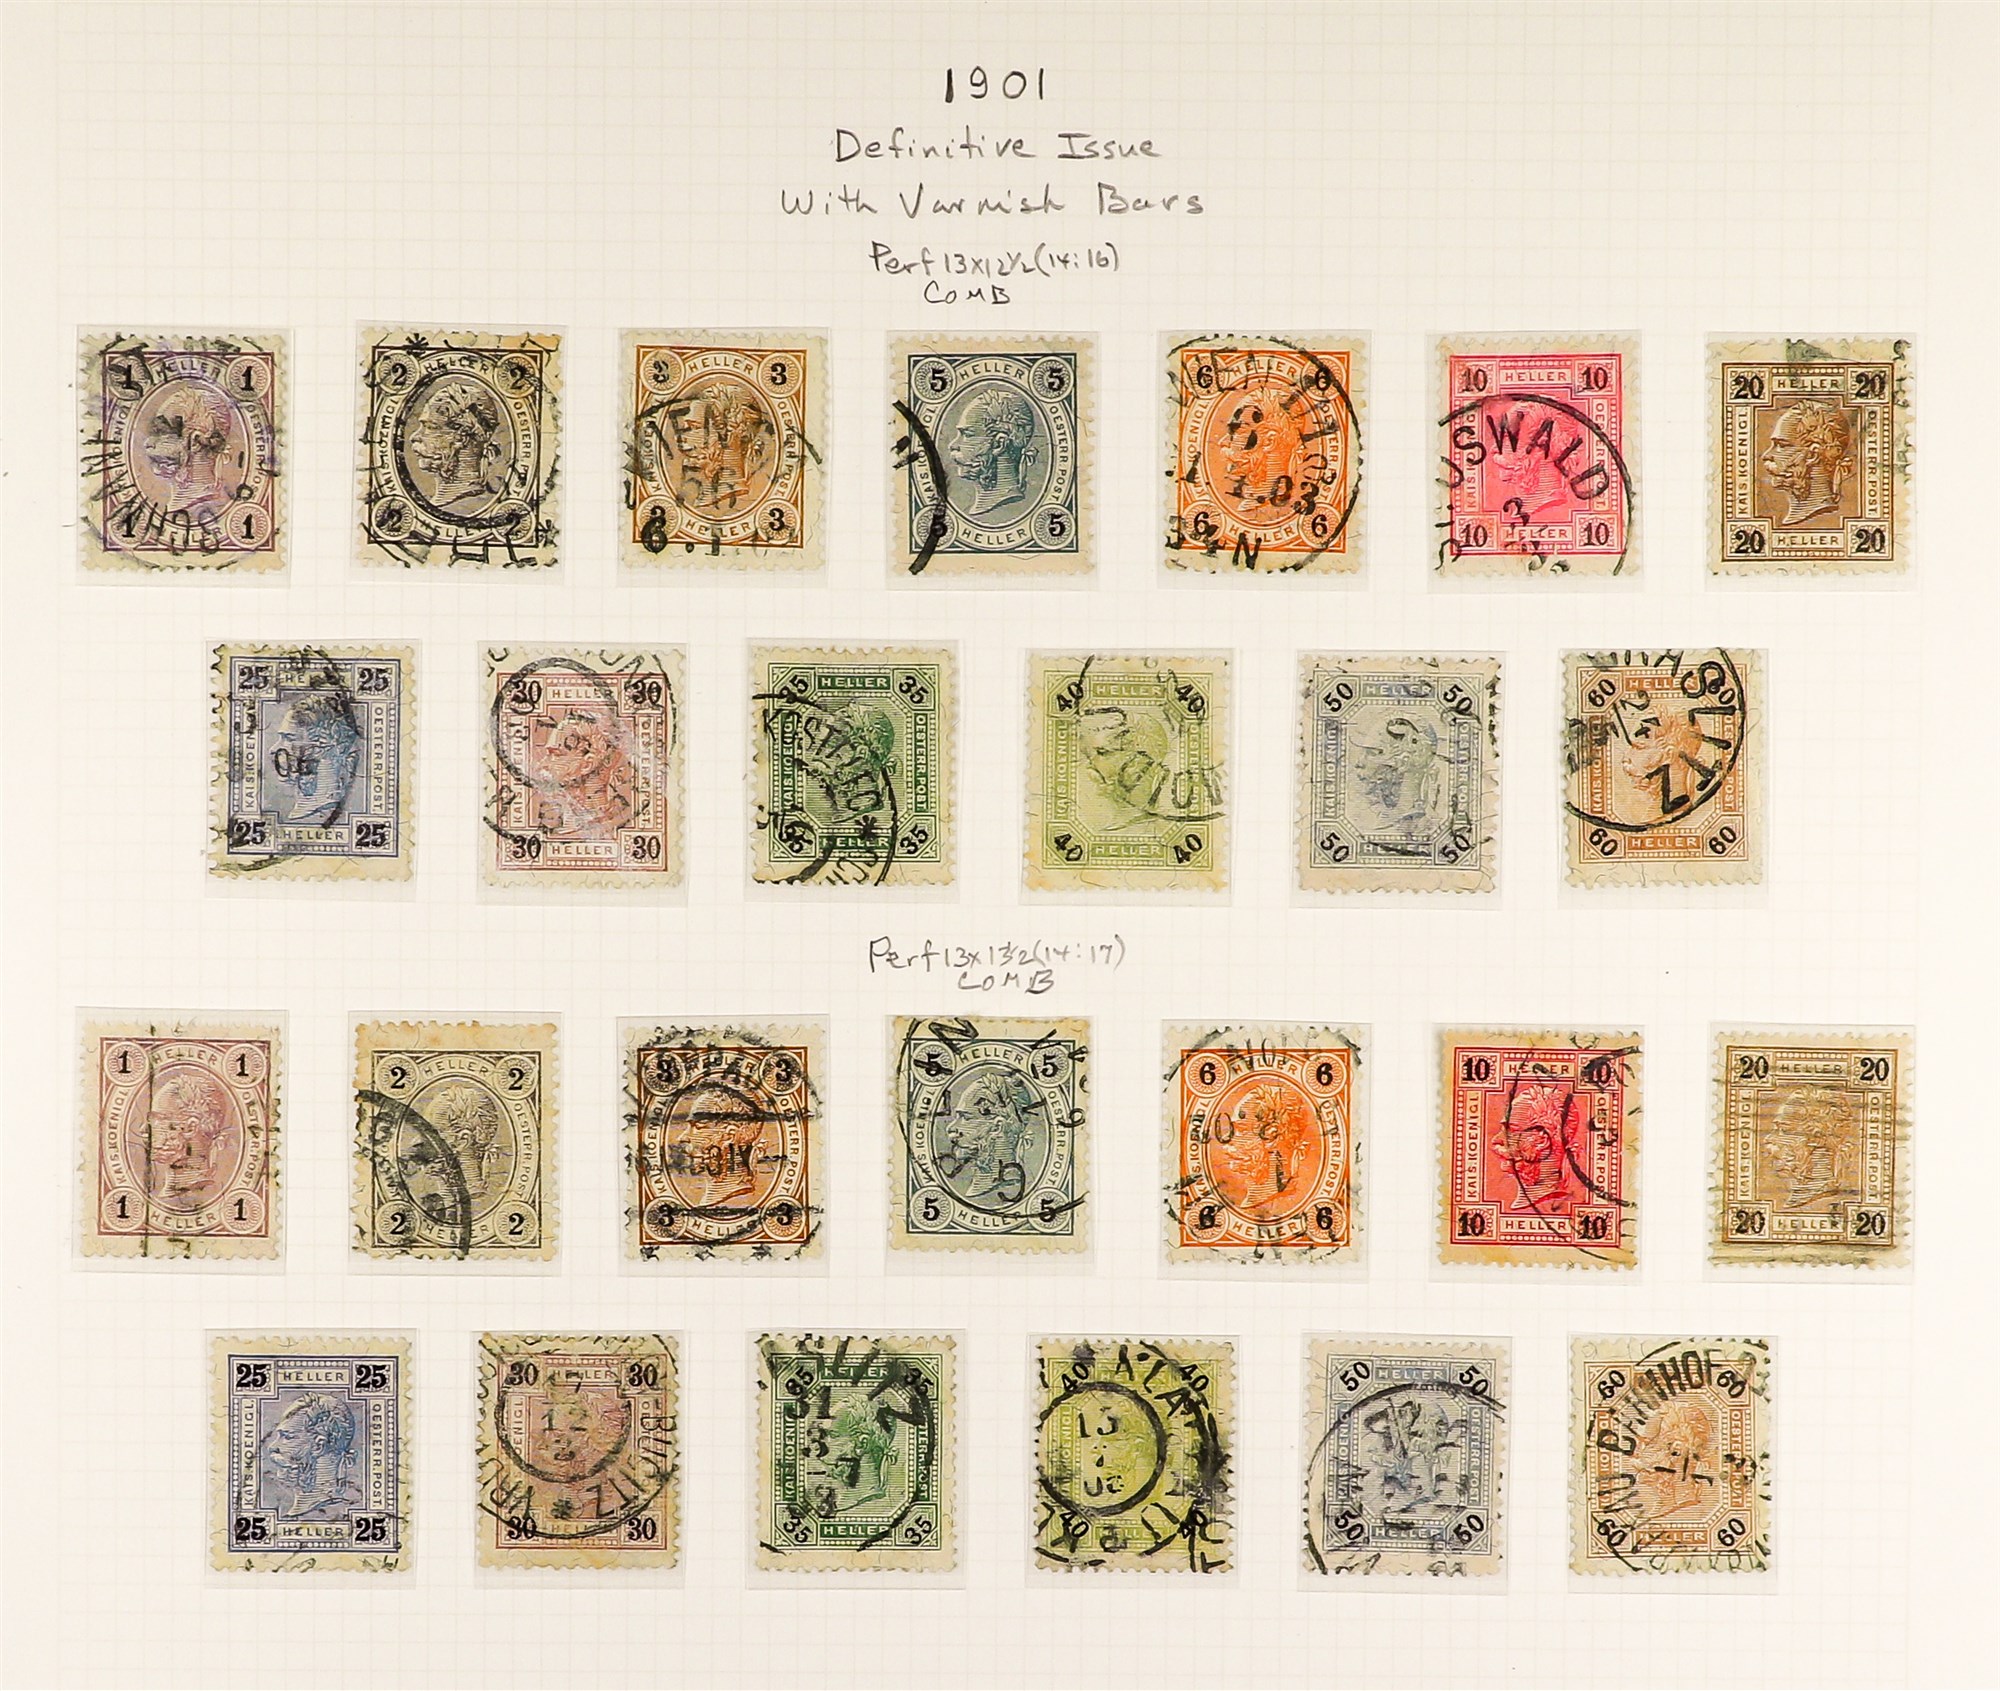 AUSTRIA 1890 - 1907 FRANZ JOSEF DEFINITIVES collection of over 300 stamps on album pages, semi- - Image 11 of 13